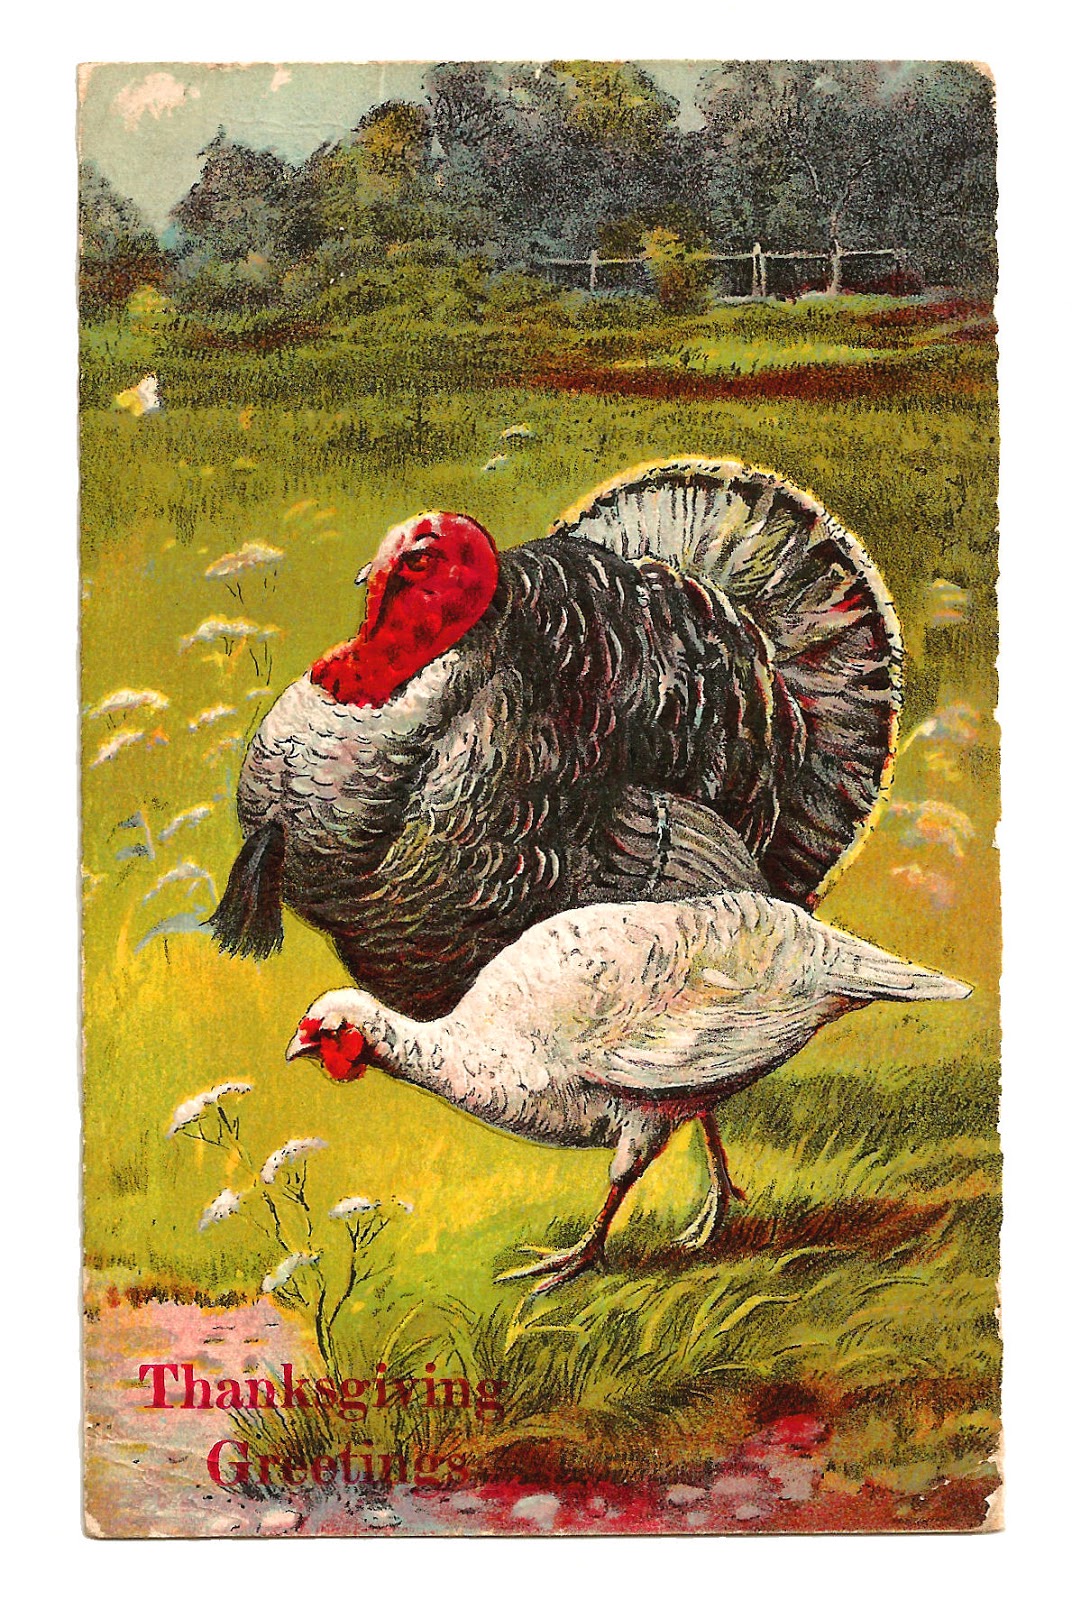 antique-images-printable-thanksgiving-greeting-with-turkey-digital